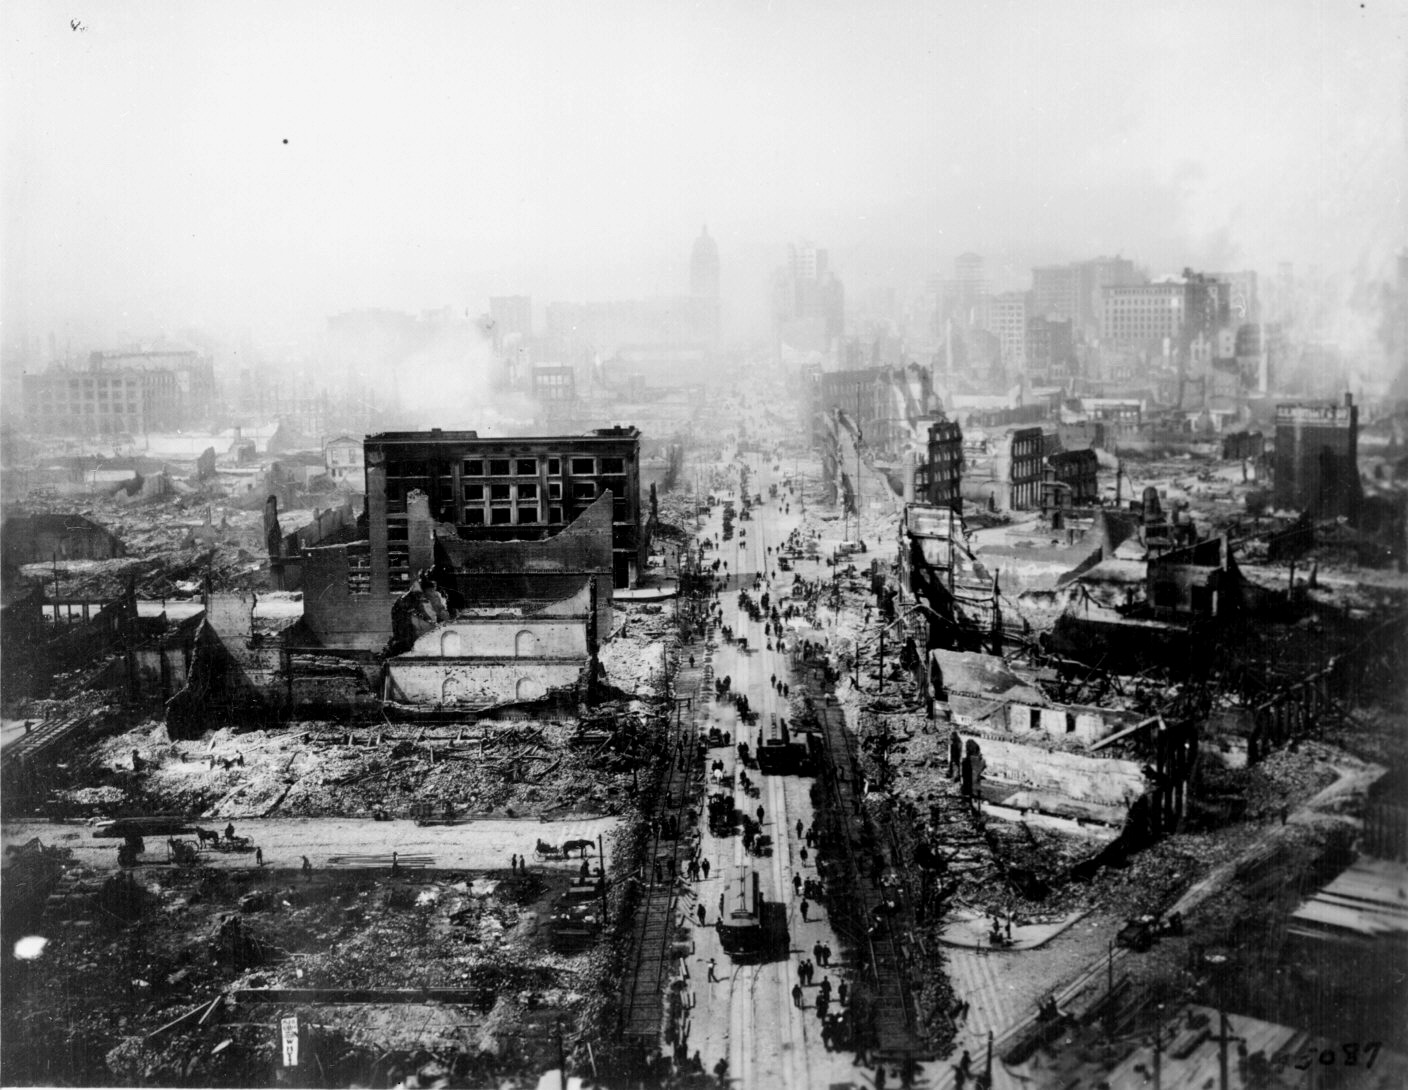 The big earthquake in San Francisco, US in 1906. A 7.8 magnitude quake hit the city, leveling much of it. Afterwards, uncontrollable fires consumed a lot of the rest of the city. Some 3,000 people died, with an unknown number hurt. Over 80% of the city was destroyed. Almost $400 million dollars worth of damage was caused (today that be almost $11 billion dollars). The city was rebuilt, and much of California sits on a fault line, just waiting for another massive earthquake that could again level cities.